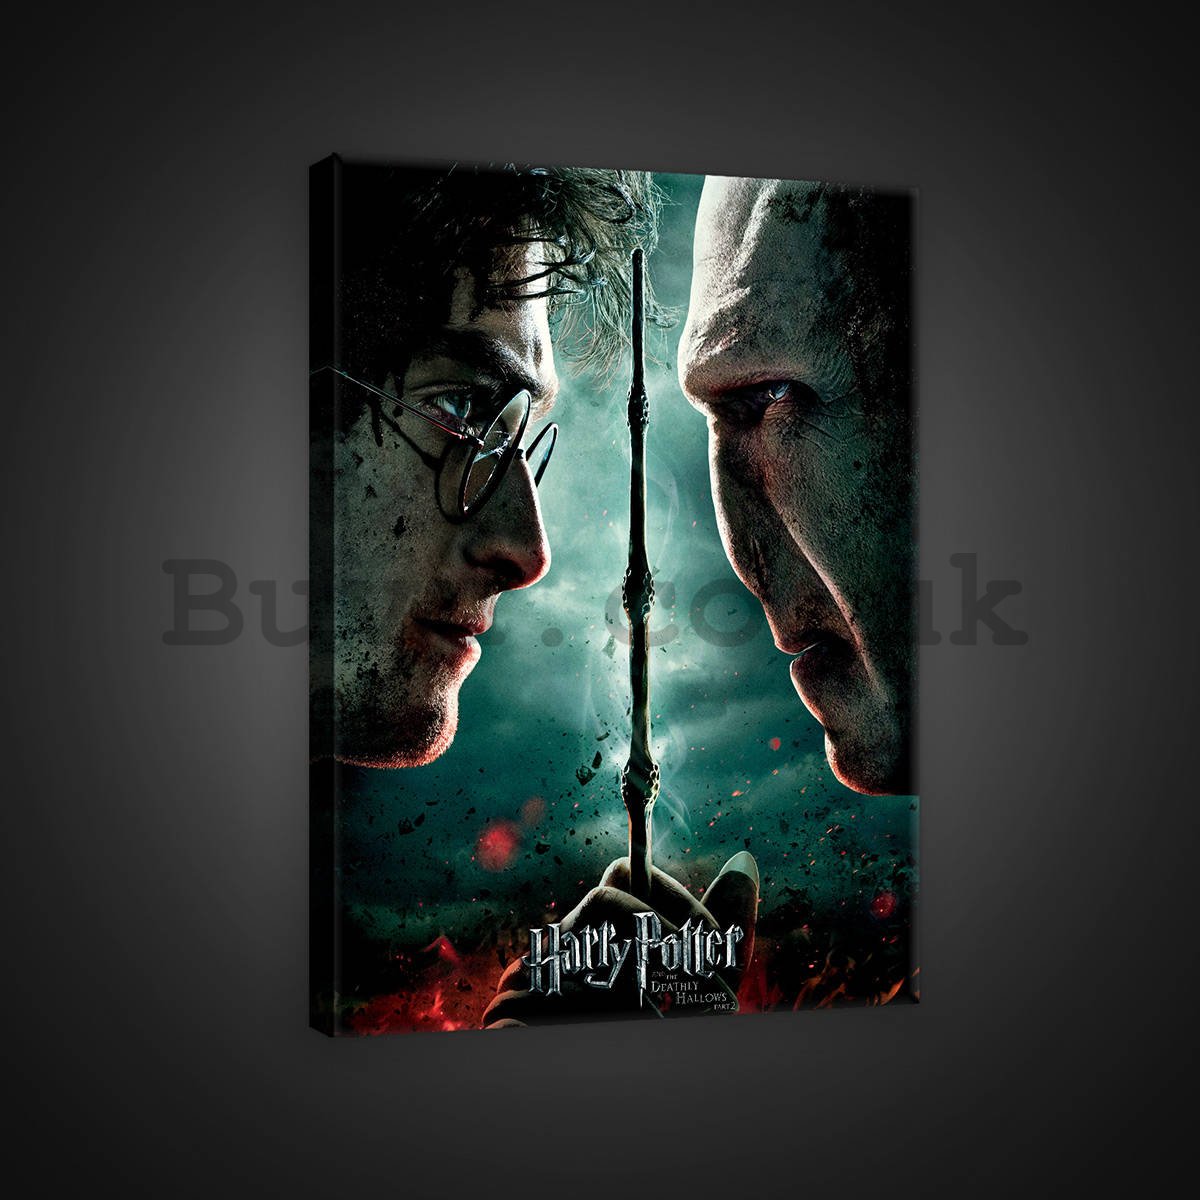 Painting on canvas: Harry Potter and Deathly Hallows Part 4 - 75x100 cm